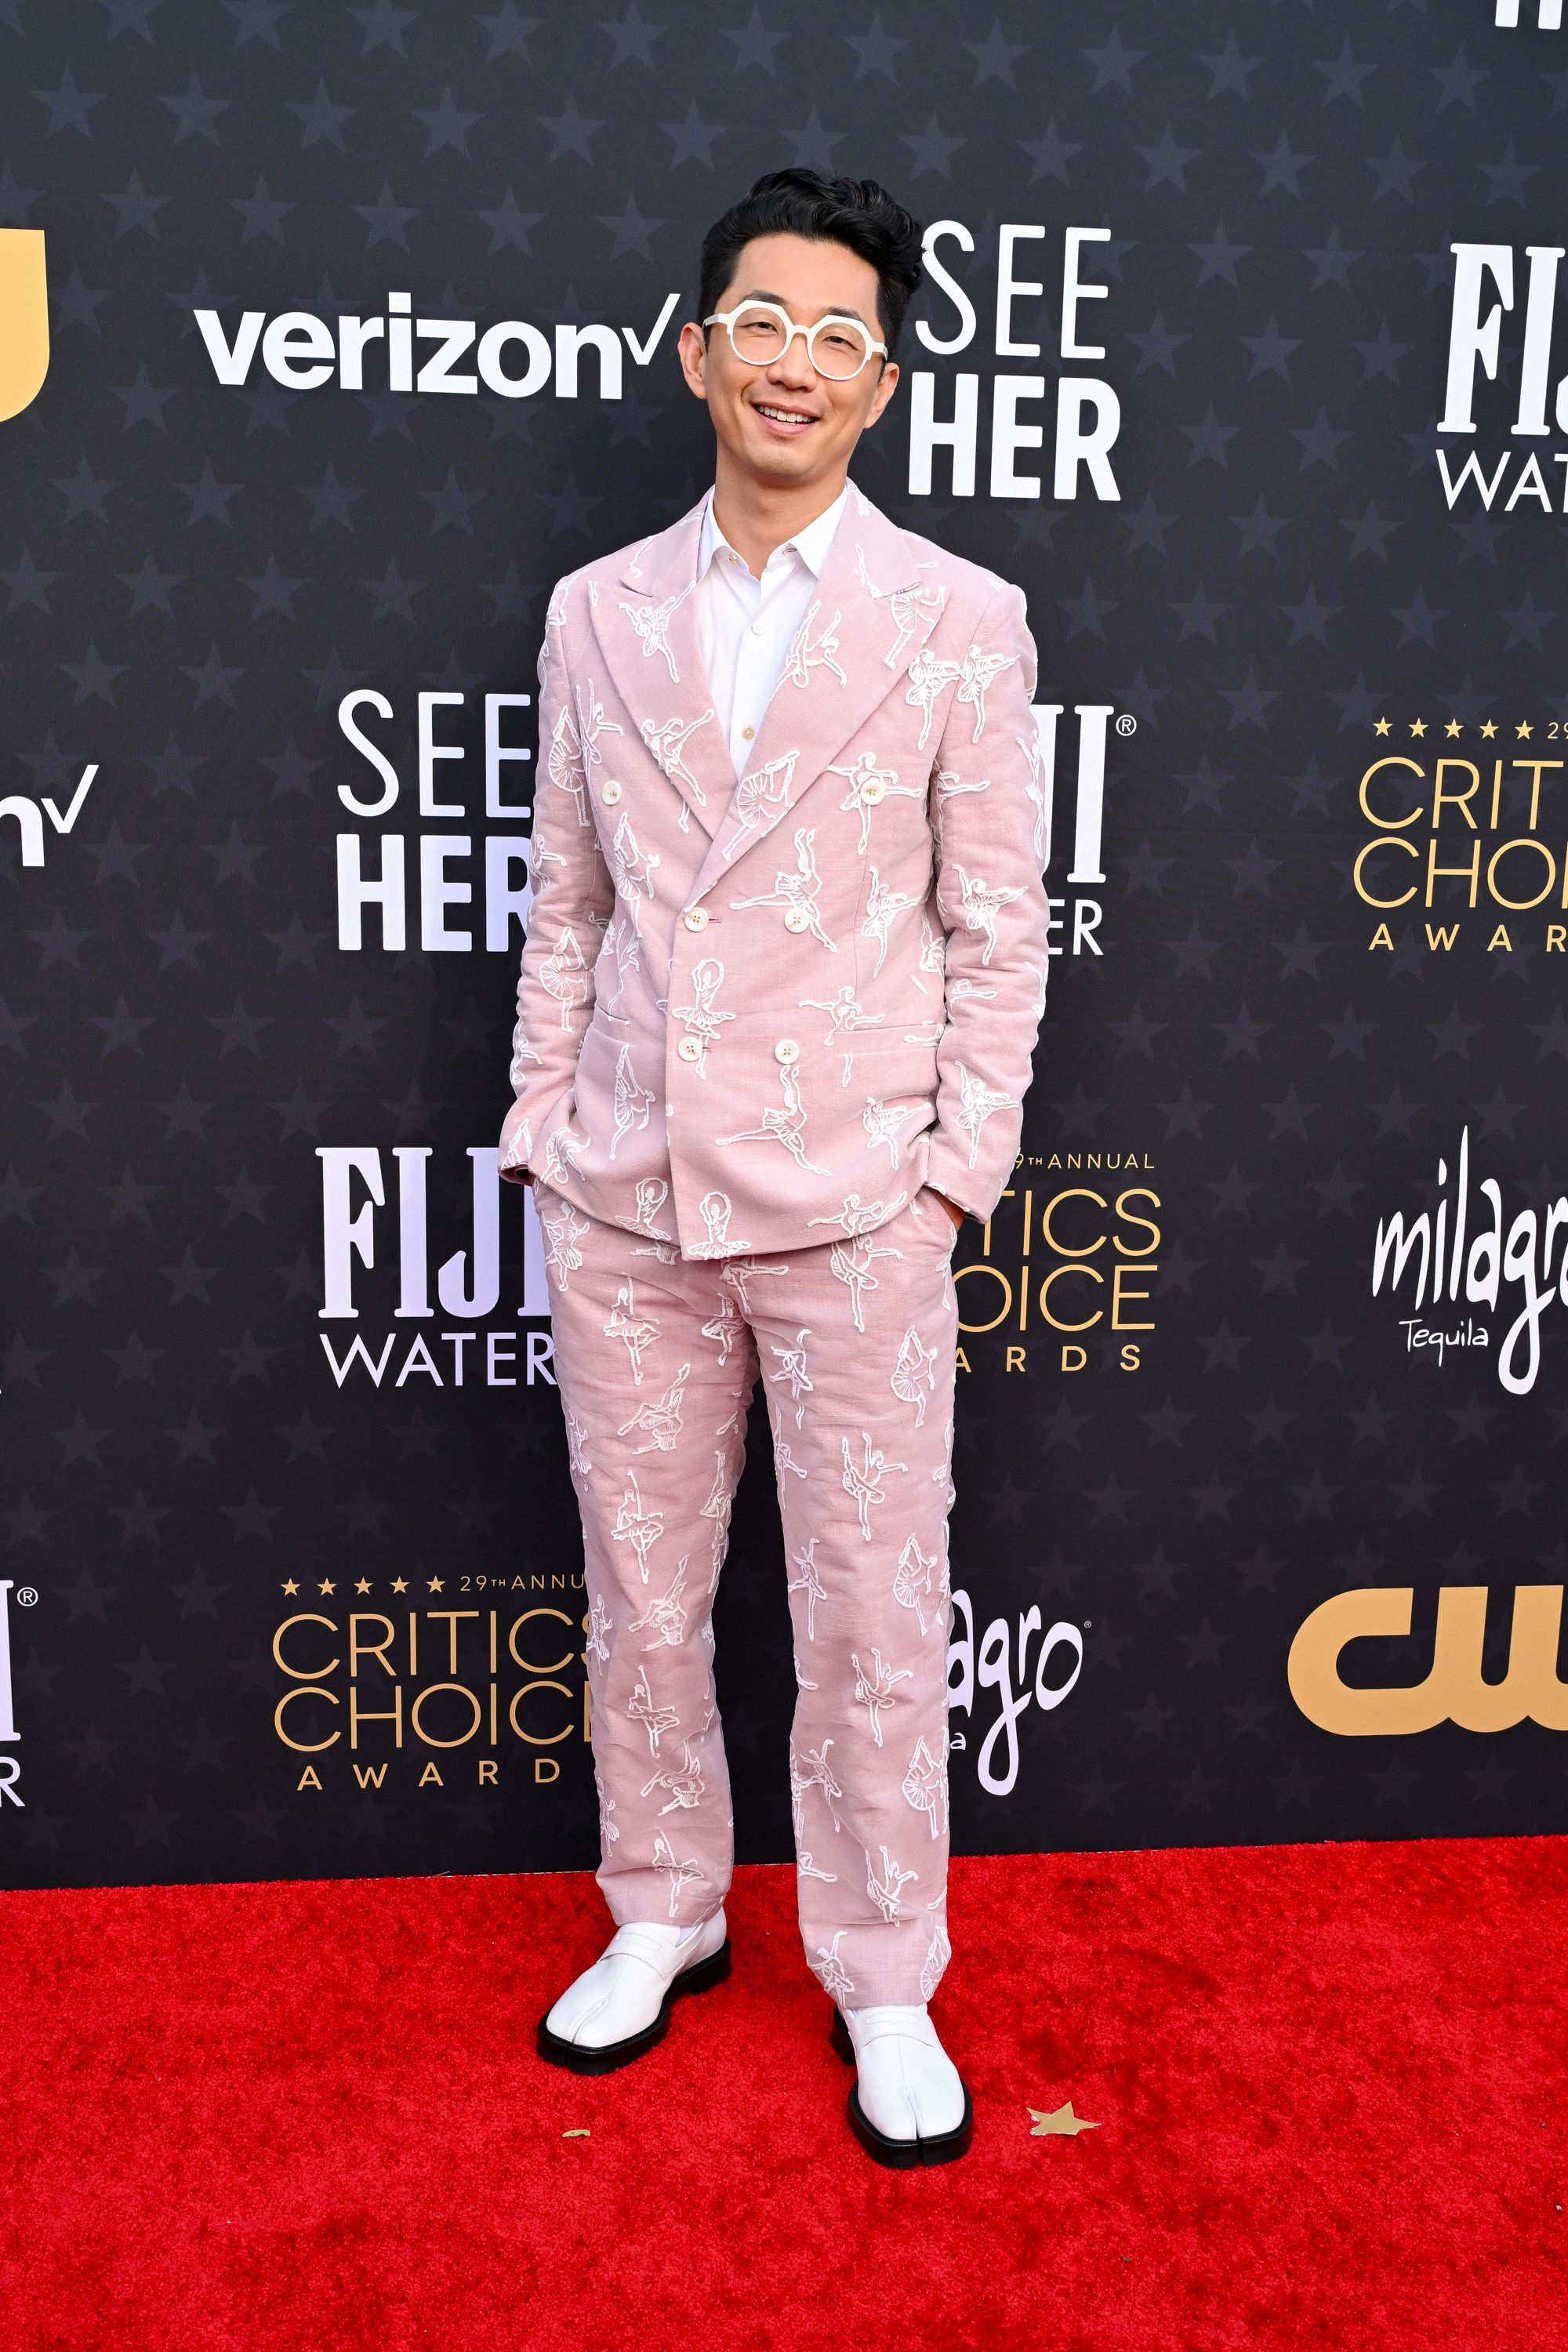 “Beef” creator Lee Sung Jin wore a playful baby pink suit embroidered with ballerinas, as well as a pair of Maison Margiela Tabi leather loafers.